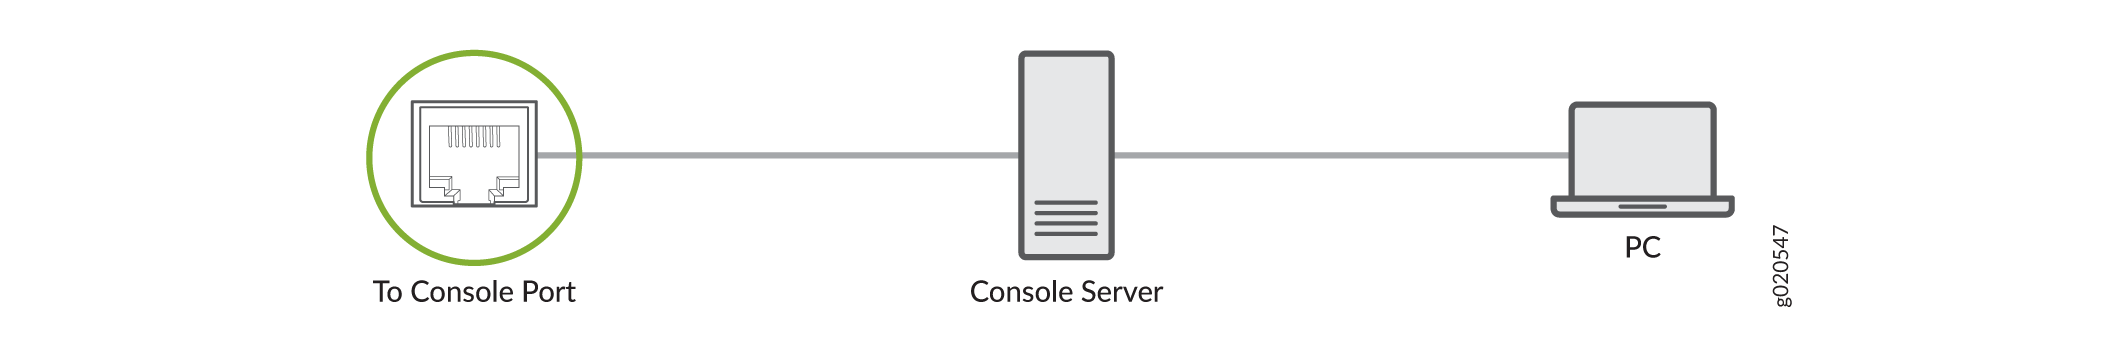 Connecting the Router to a Management Console Through a Console Server